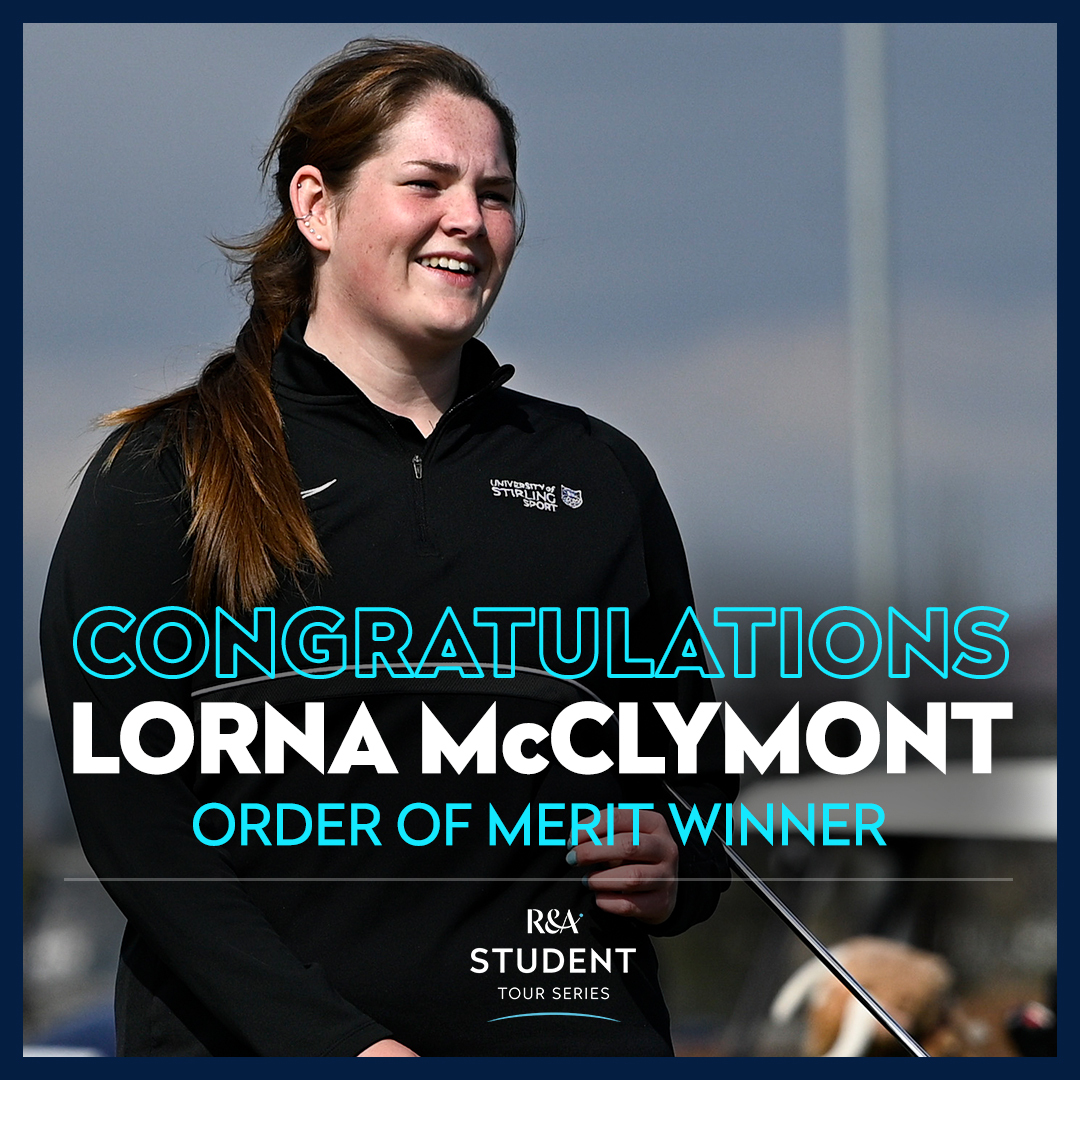 With three incredible victories in Ireland, Portugal and Spain, Lorna McClymont is crowned women’s Order of Merit winner on our Student Tour Series 🏆